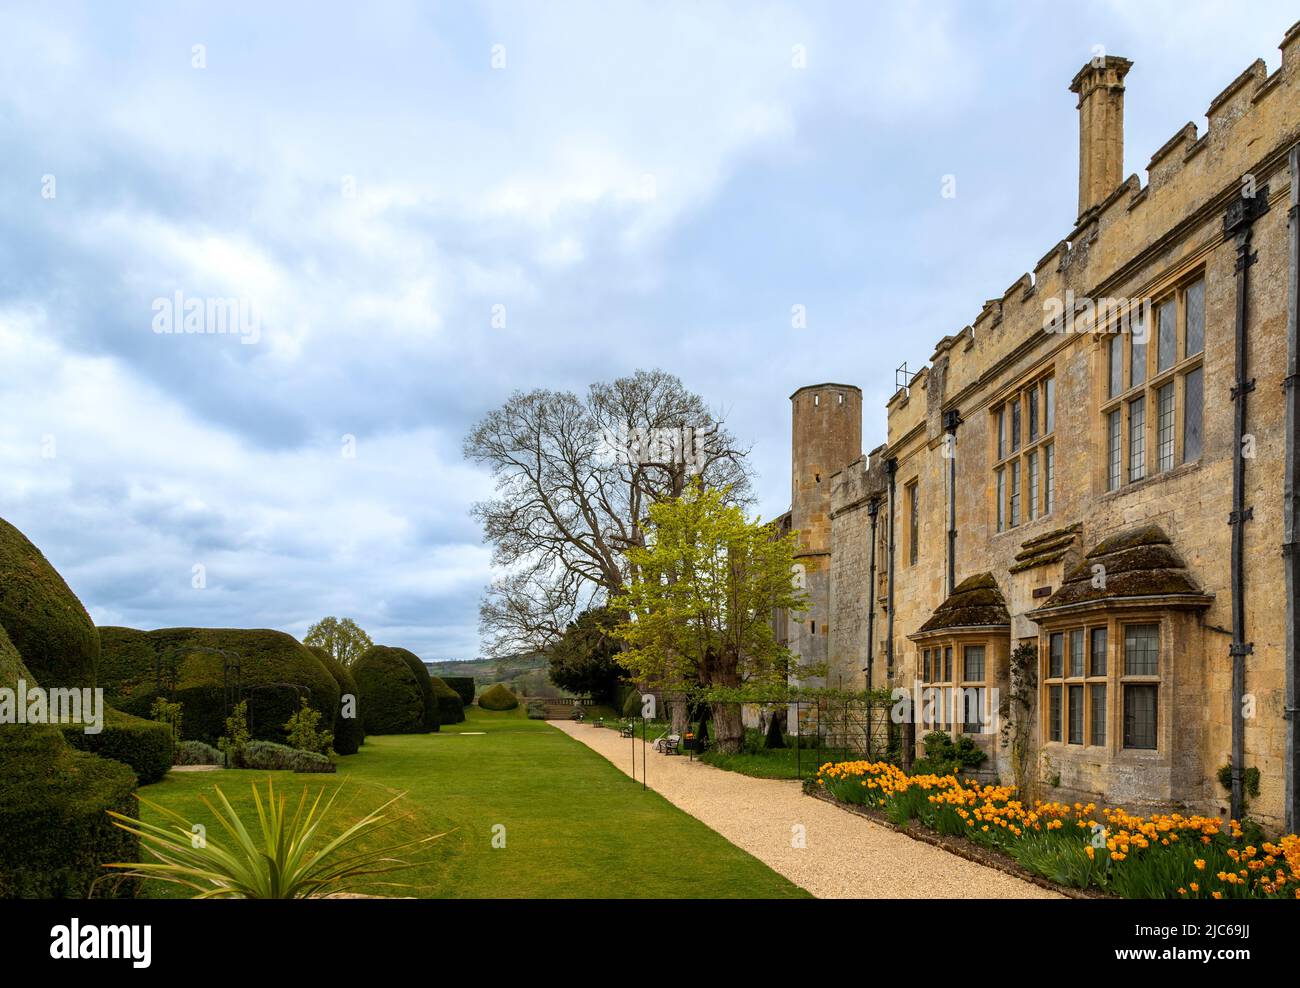 Sudeley Castle, a 15th century, Grade I listed castle, viewed from the Queen's Garden, Sudeley, Gloucestershire, Cotswolds, England, Great Britain, UK Stock Photo